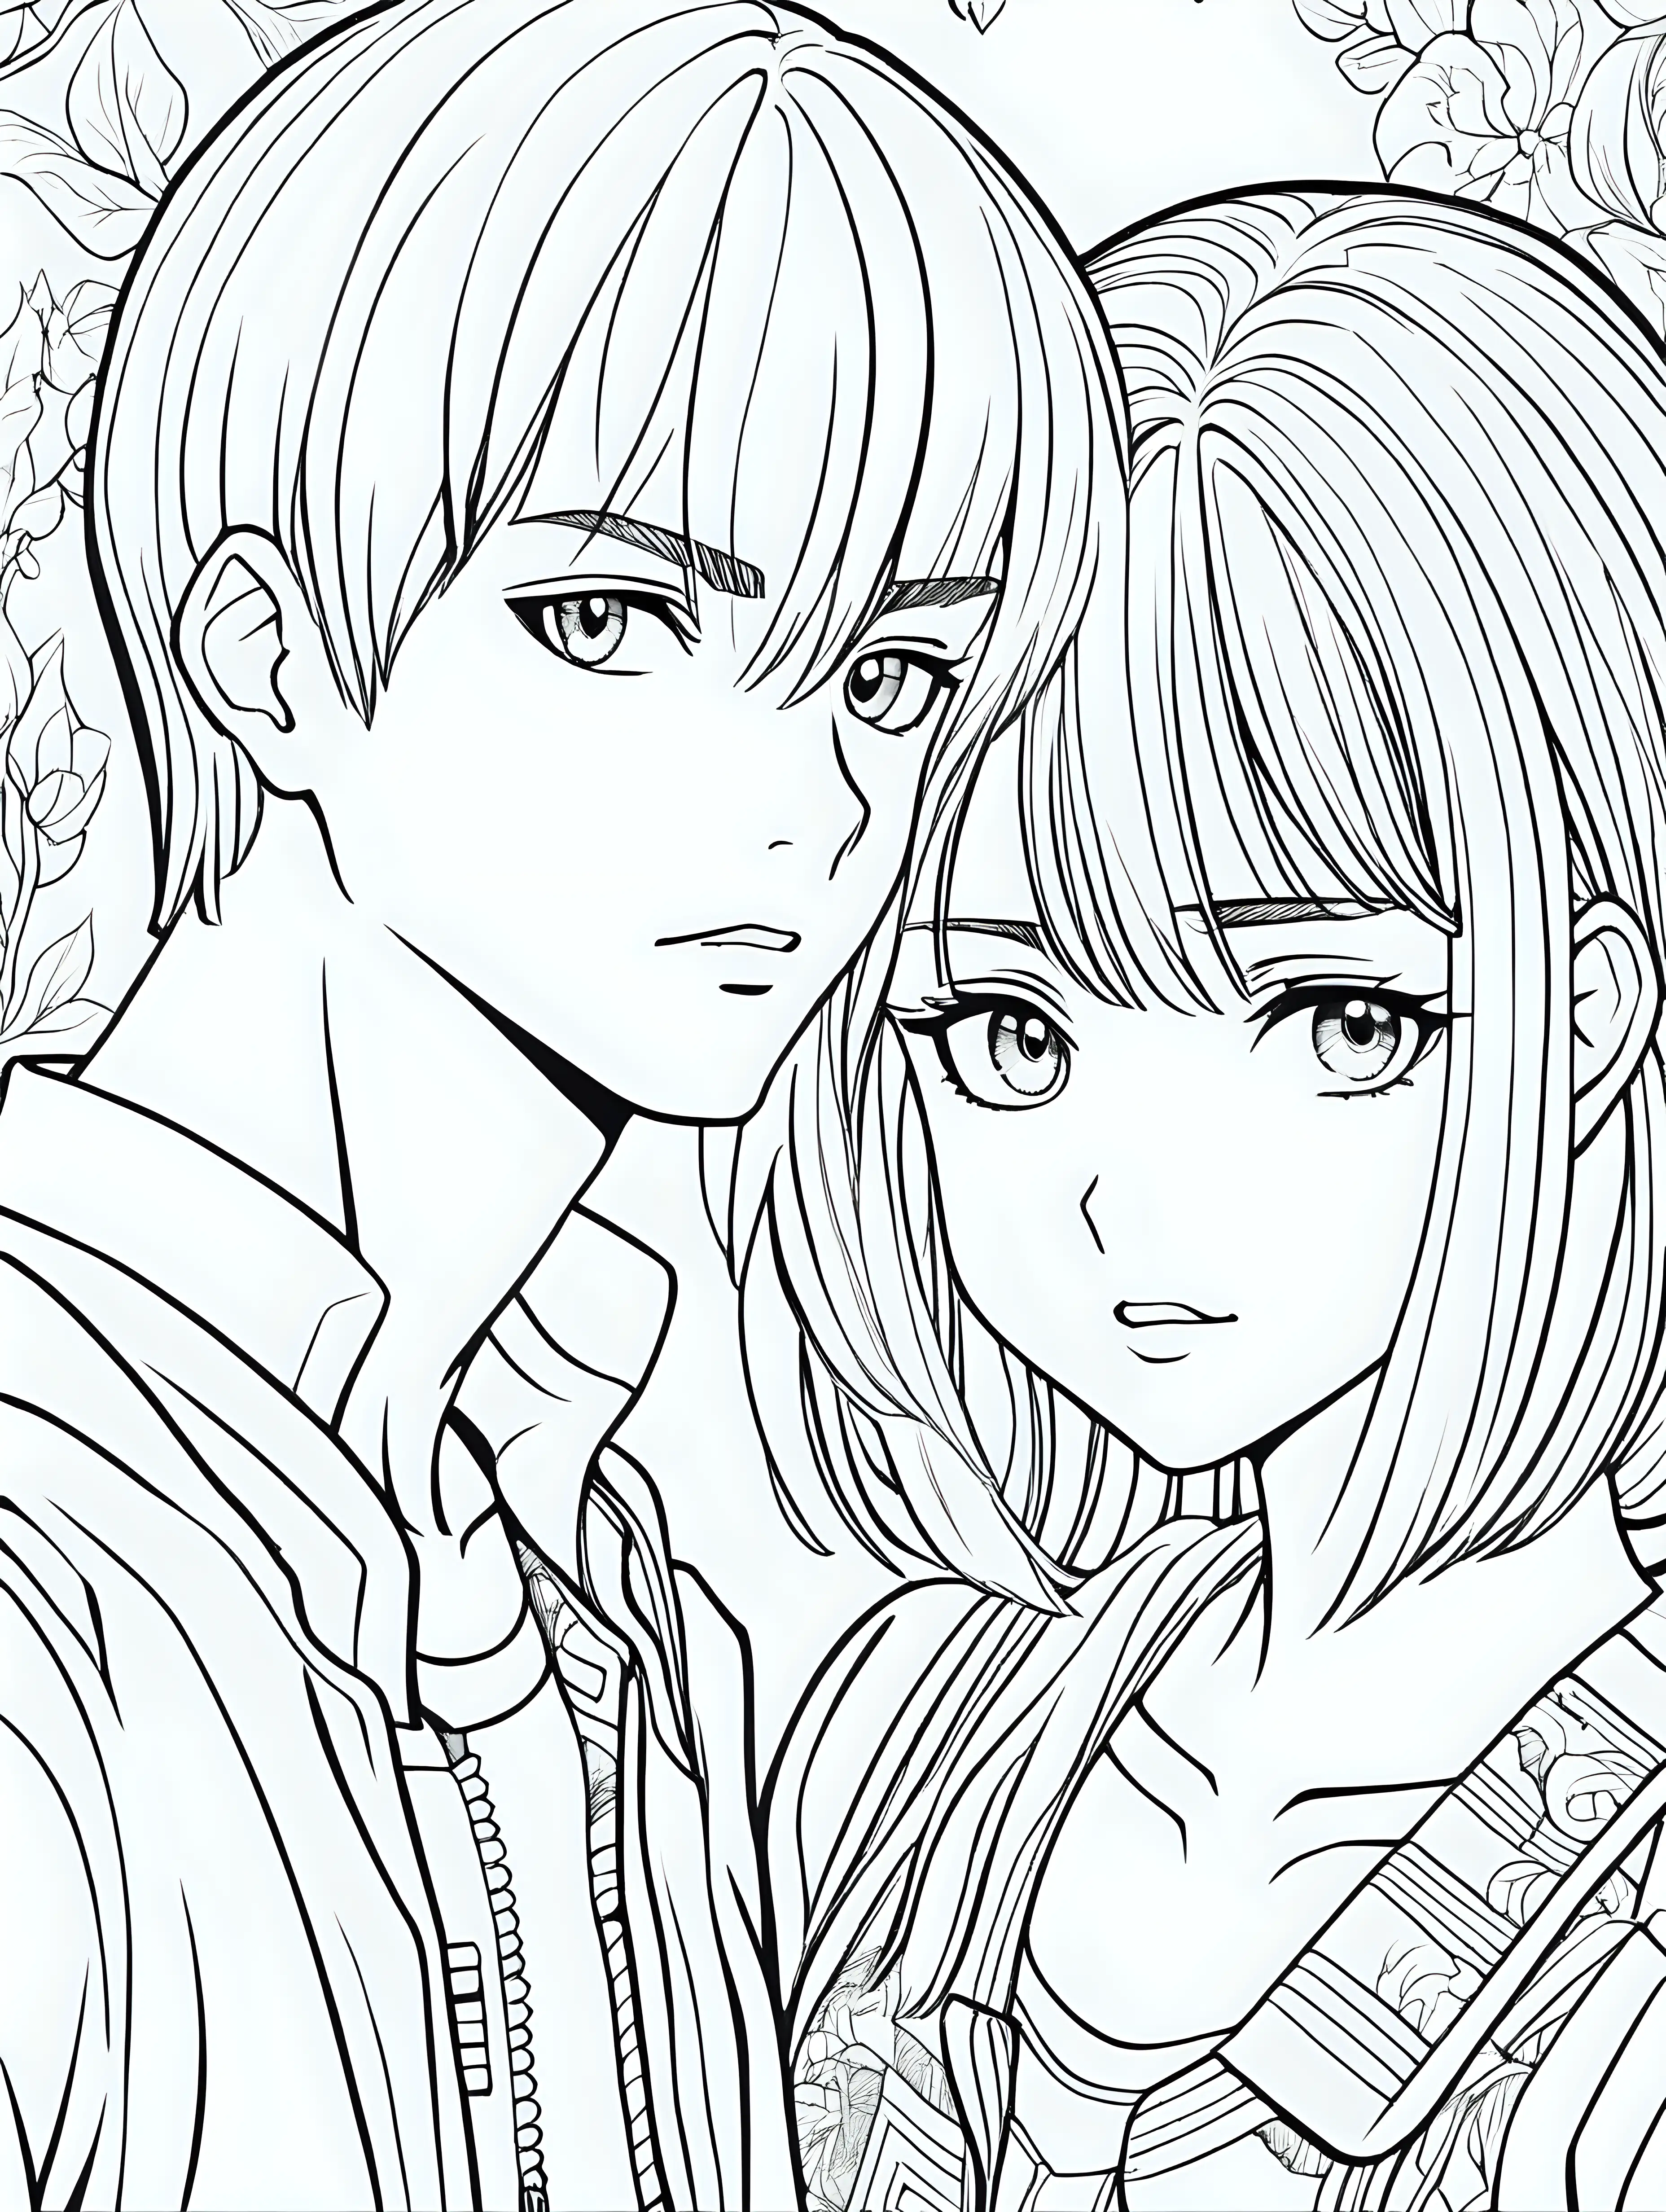 A adult coloring book page of two young persons. Style: Manga